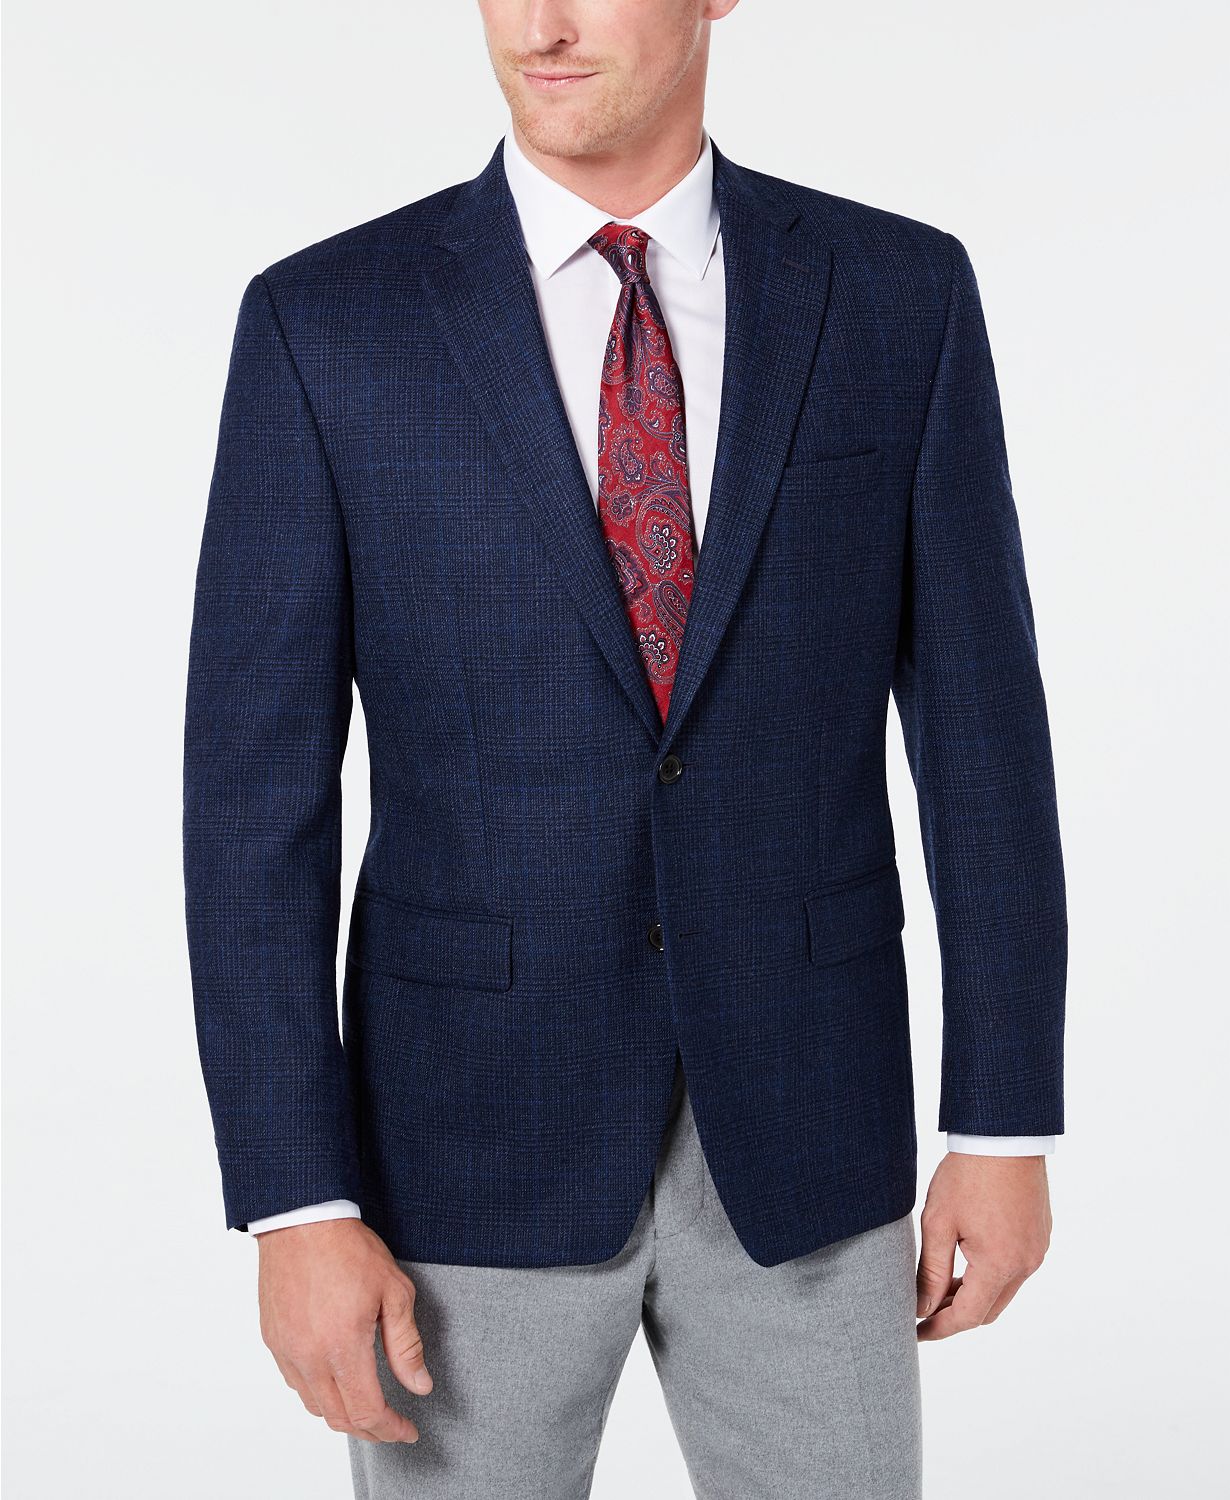 Macy’s Up to 80% Off Men’s Clearance - BuyVia